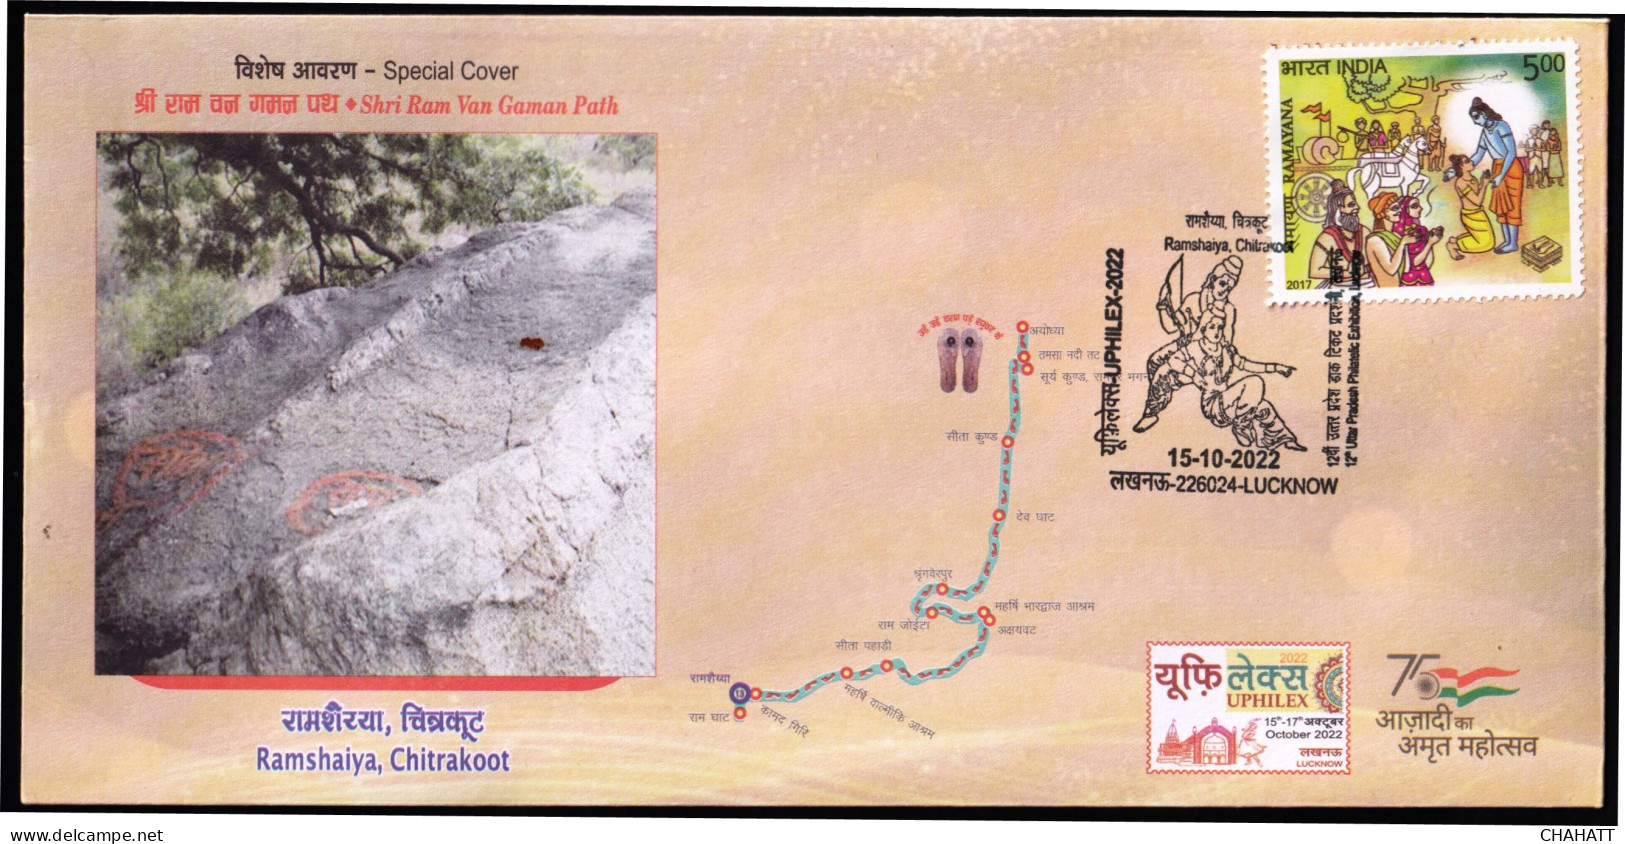 HINDUISM - RAMAYAN -CHITRAKOOT - ARCHERY - PICTORIAL CANCELLATION - SPECIAL COVER - INDIA -2022- BX4-23 - Hindouisme